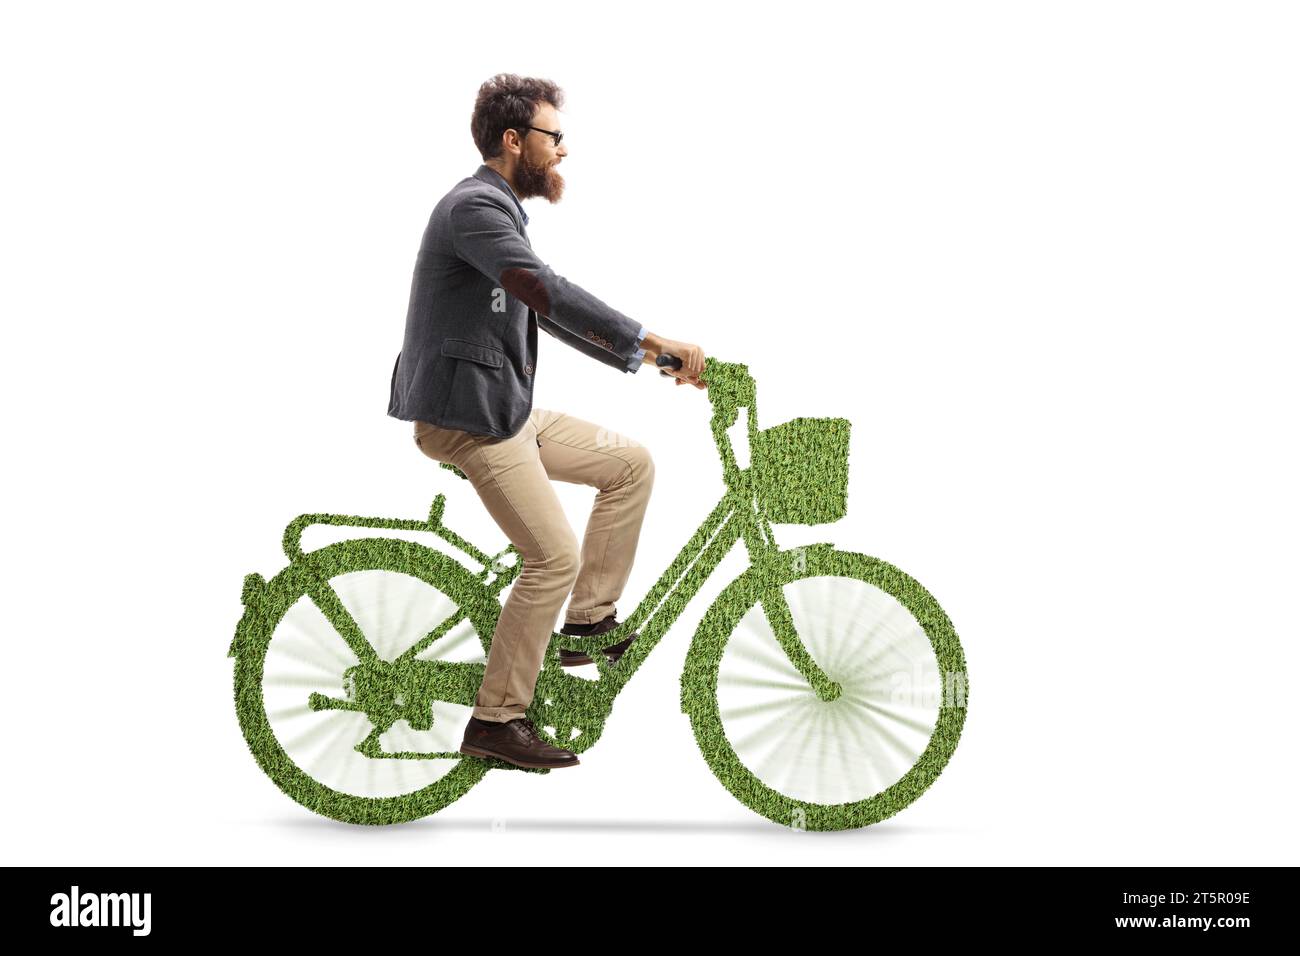 Bearded man riding a bike made of green grass isolated on white background Stock Photo